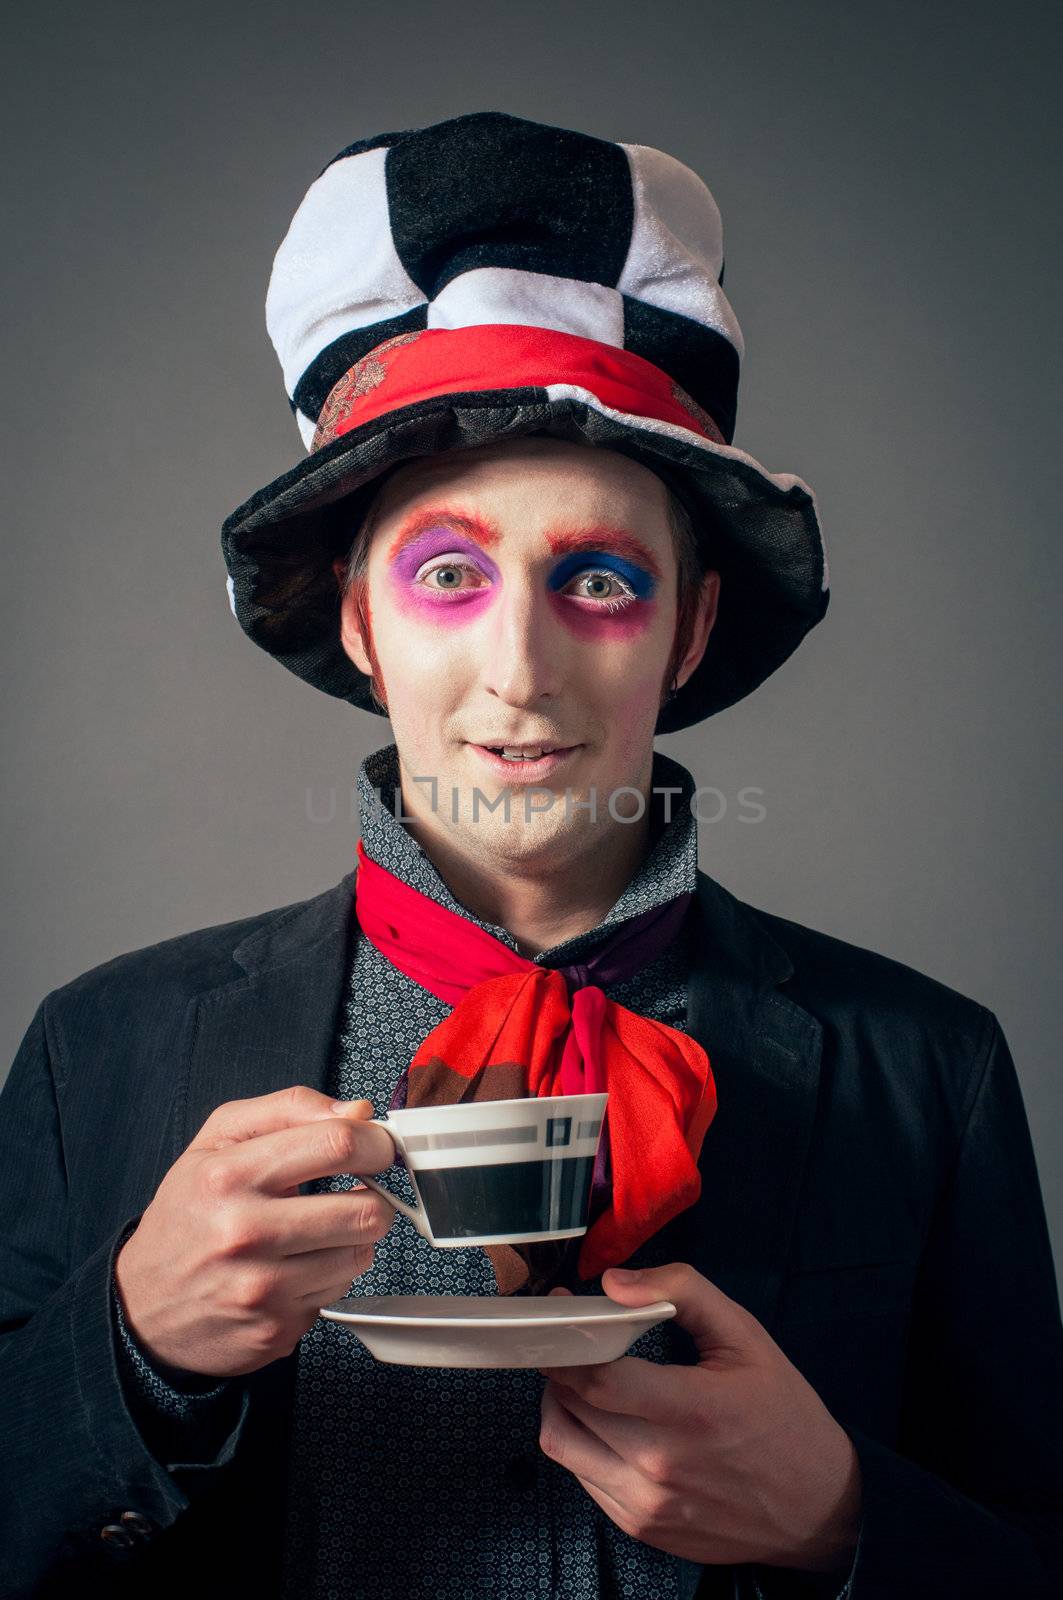 Young man in the image of the Crazy Hatter from "Alice's Adventures in Wonderland" by Lewis Carroll